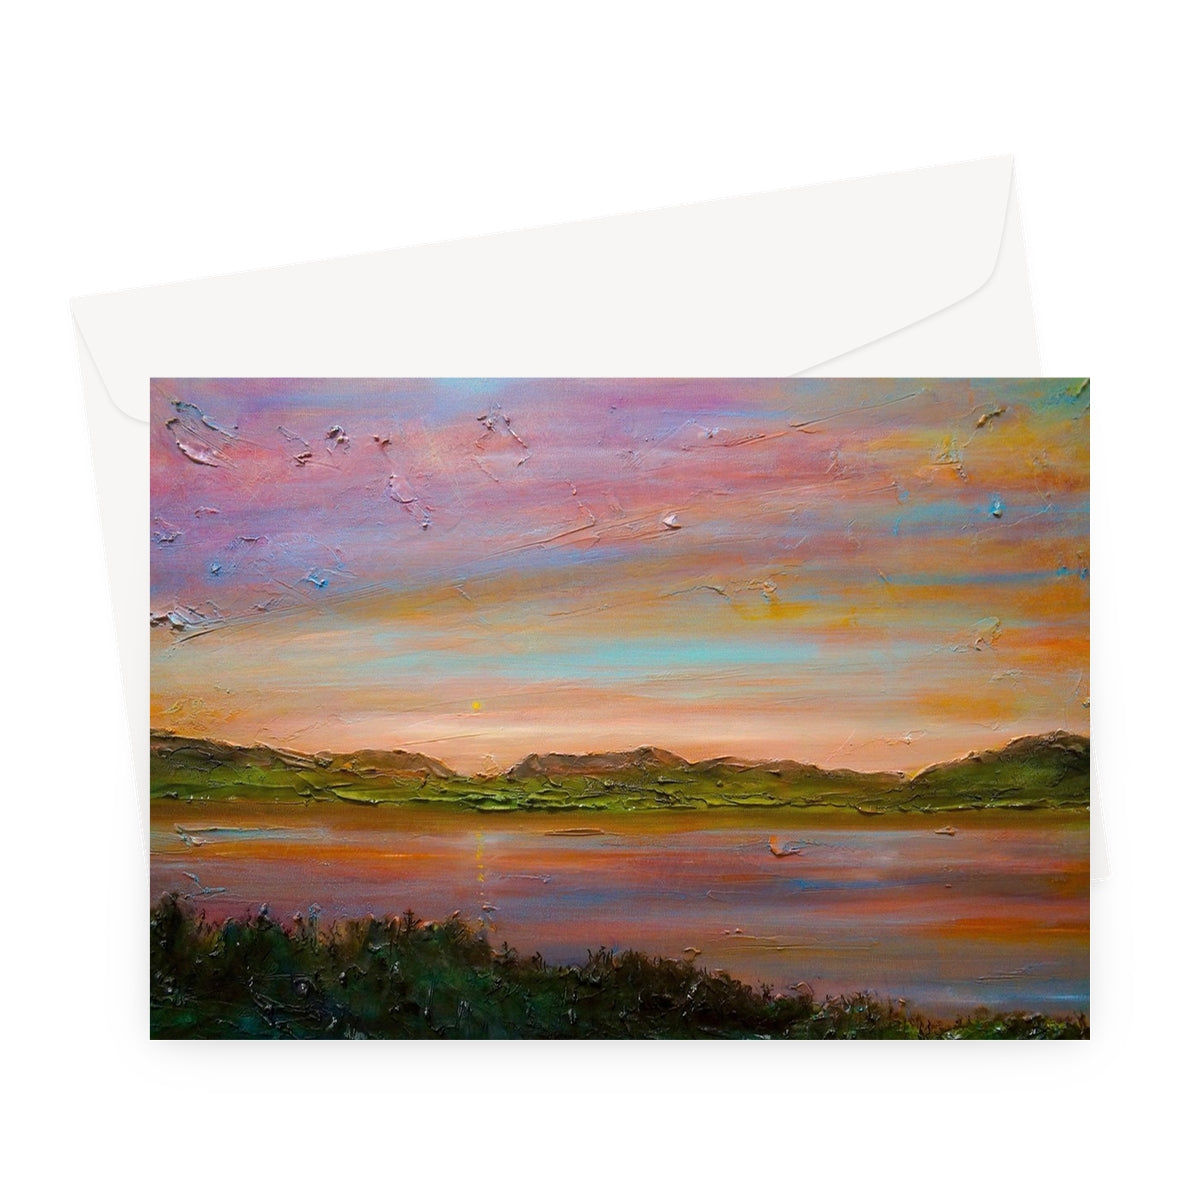 Gourock Golf Club Sunset Art Gifts Greeting Card-Greetings Cards-River Clyde Art Gallery-A5 Landscape-1 Card-Paintings, Prints, Homeware, Art Gifts From Scotland By Scottish Artist Kevin Hunter